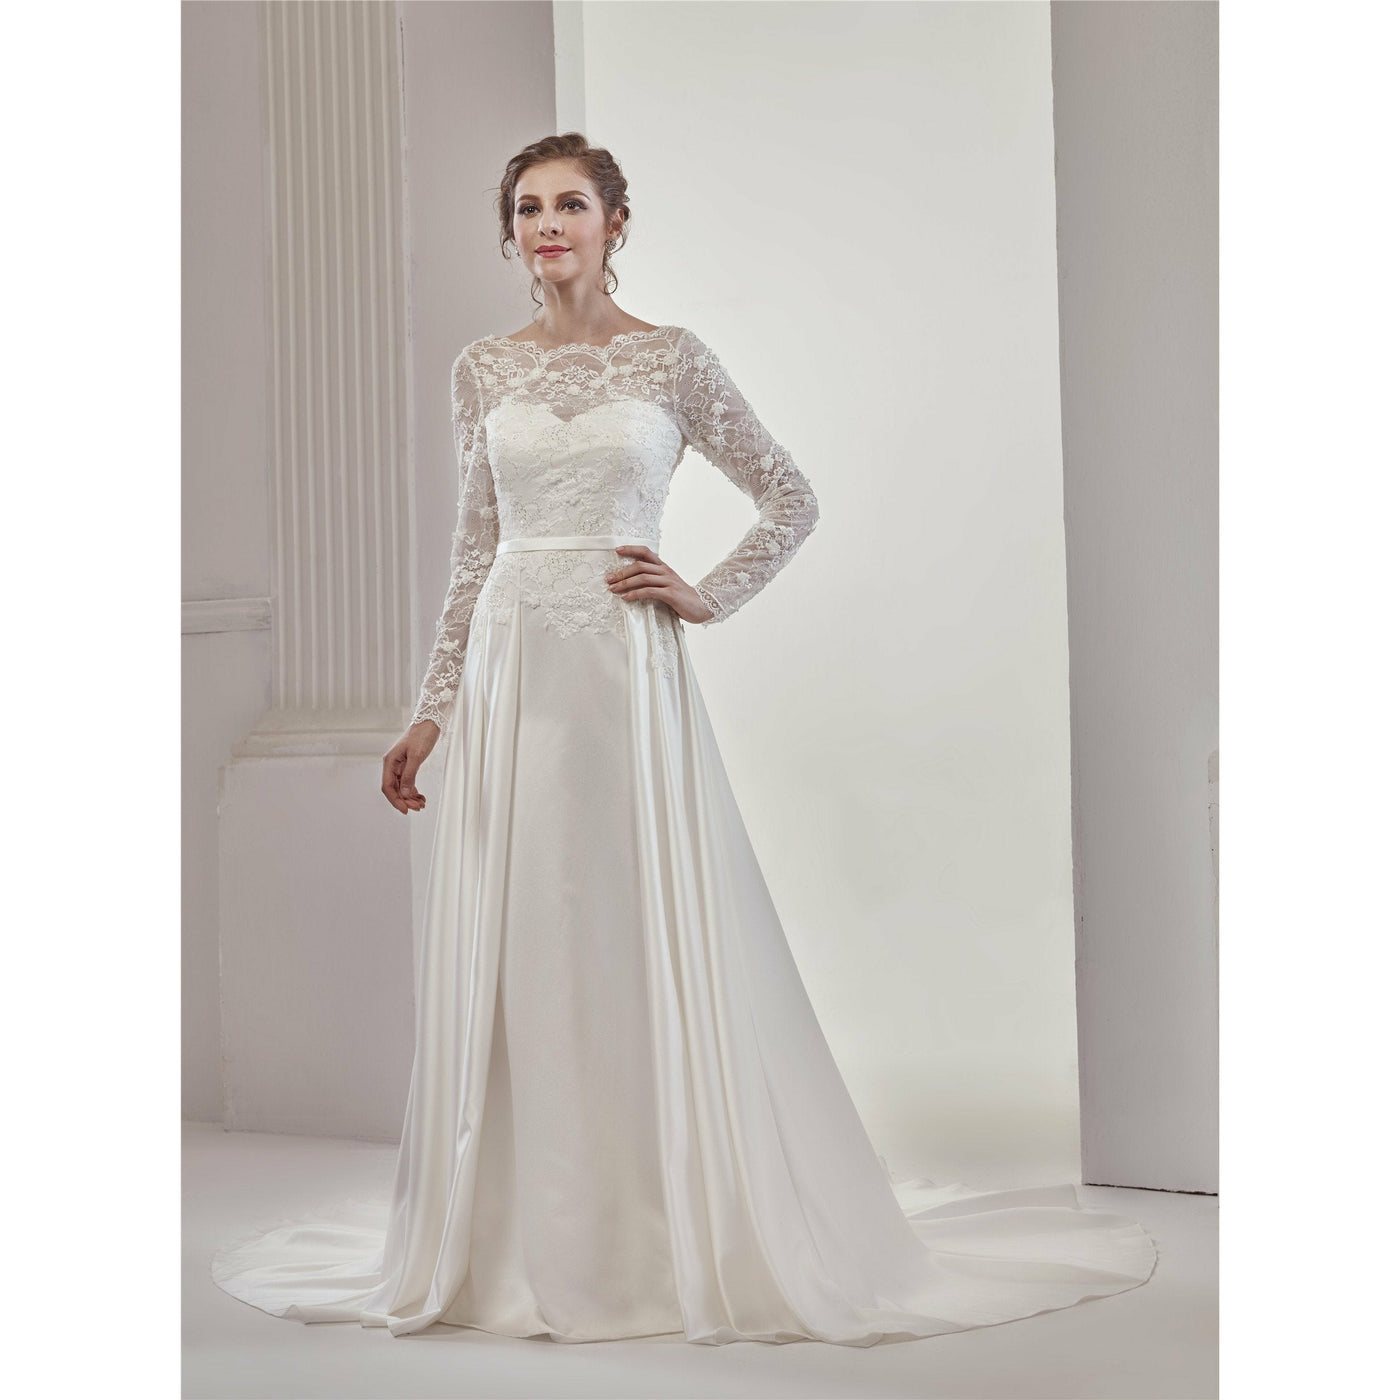 Chicely Long sleeves chantilly lace satin wedding dress